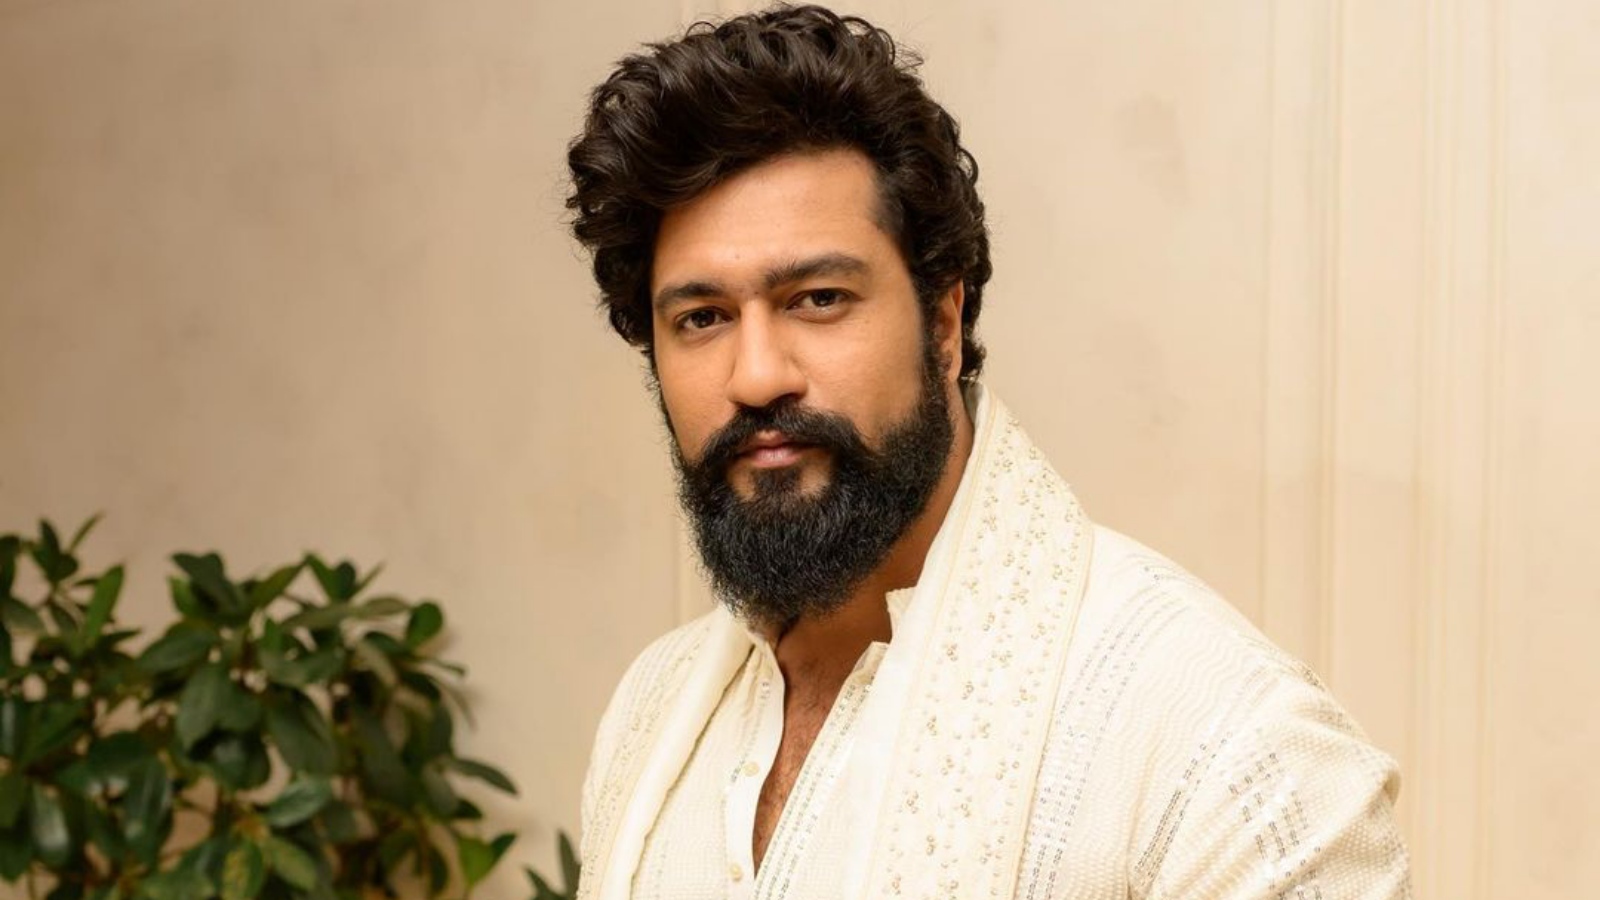 Fashion Friday: 5 recent looks of Vicky Kaushal that deserve your attention